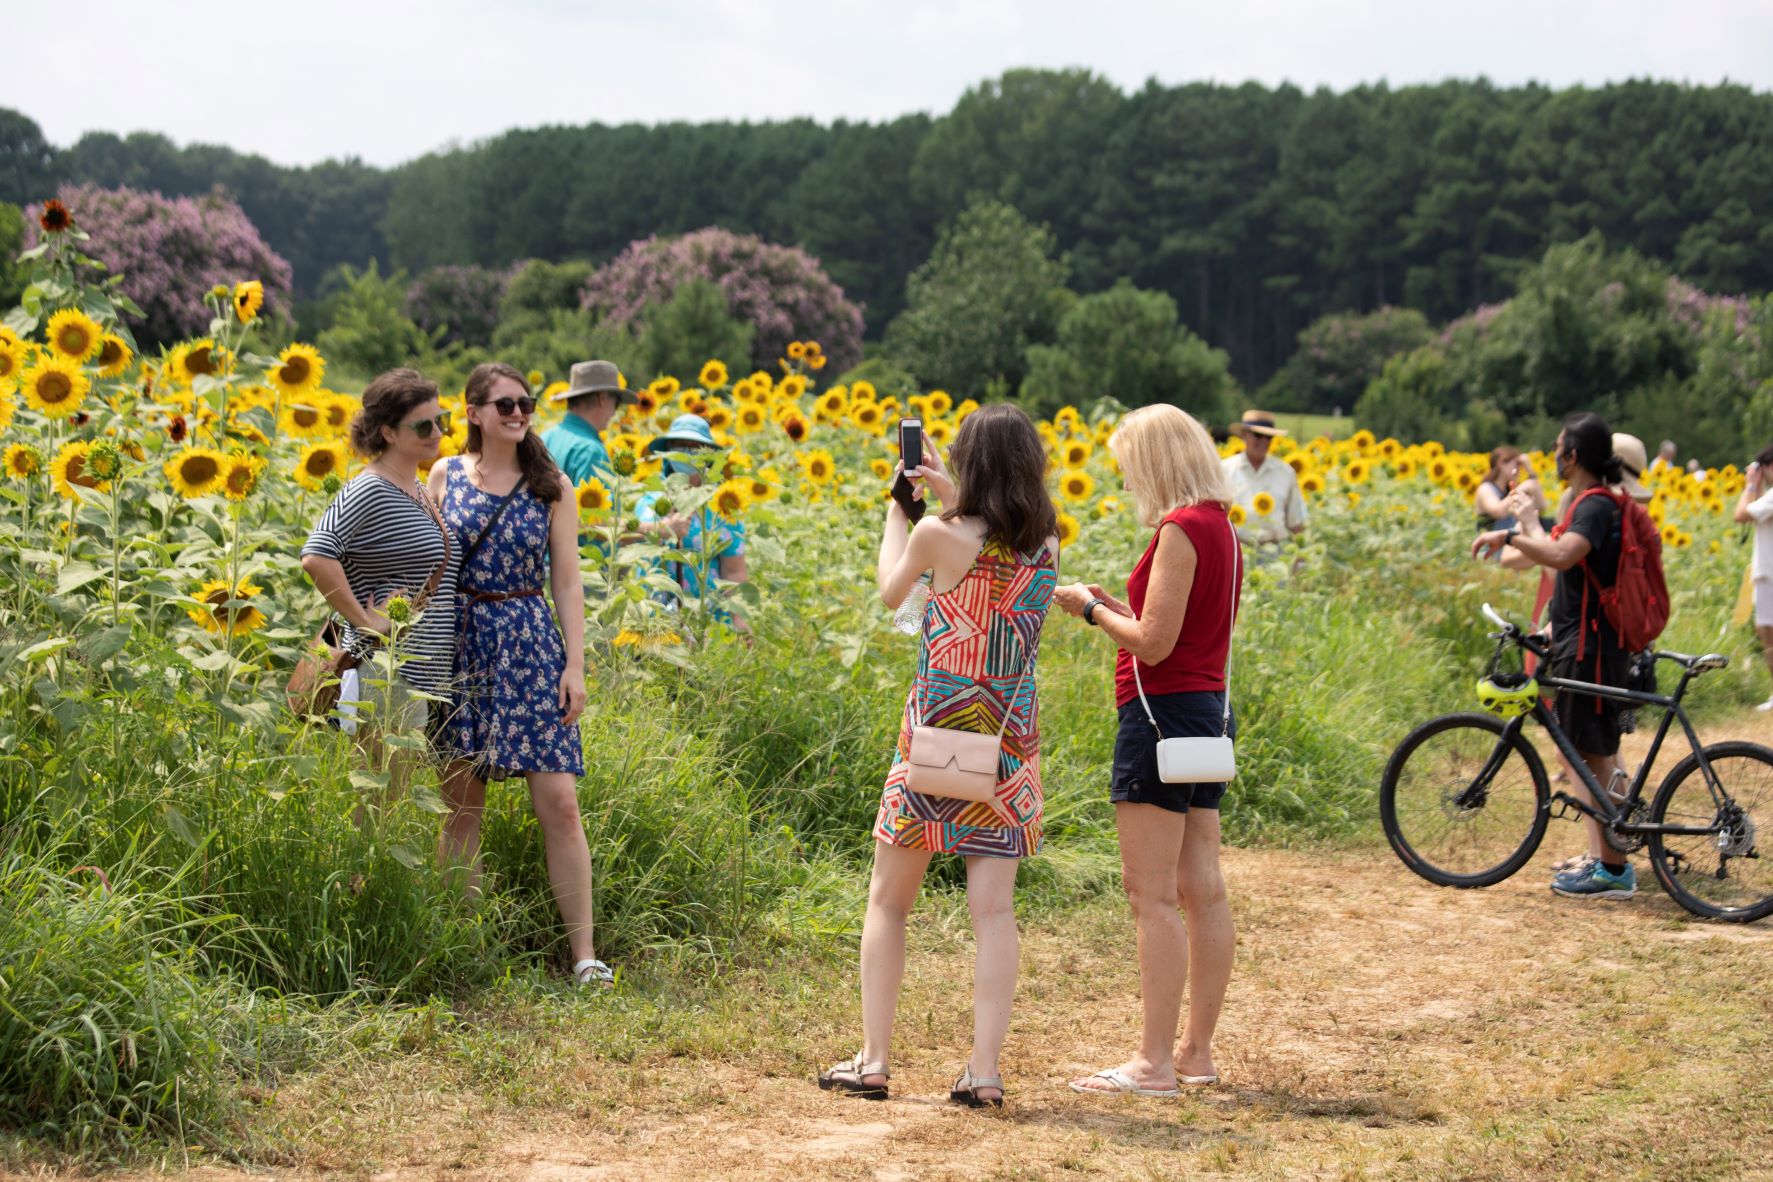 Visitors taking photos at the sunflower field